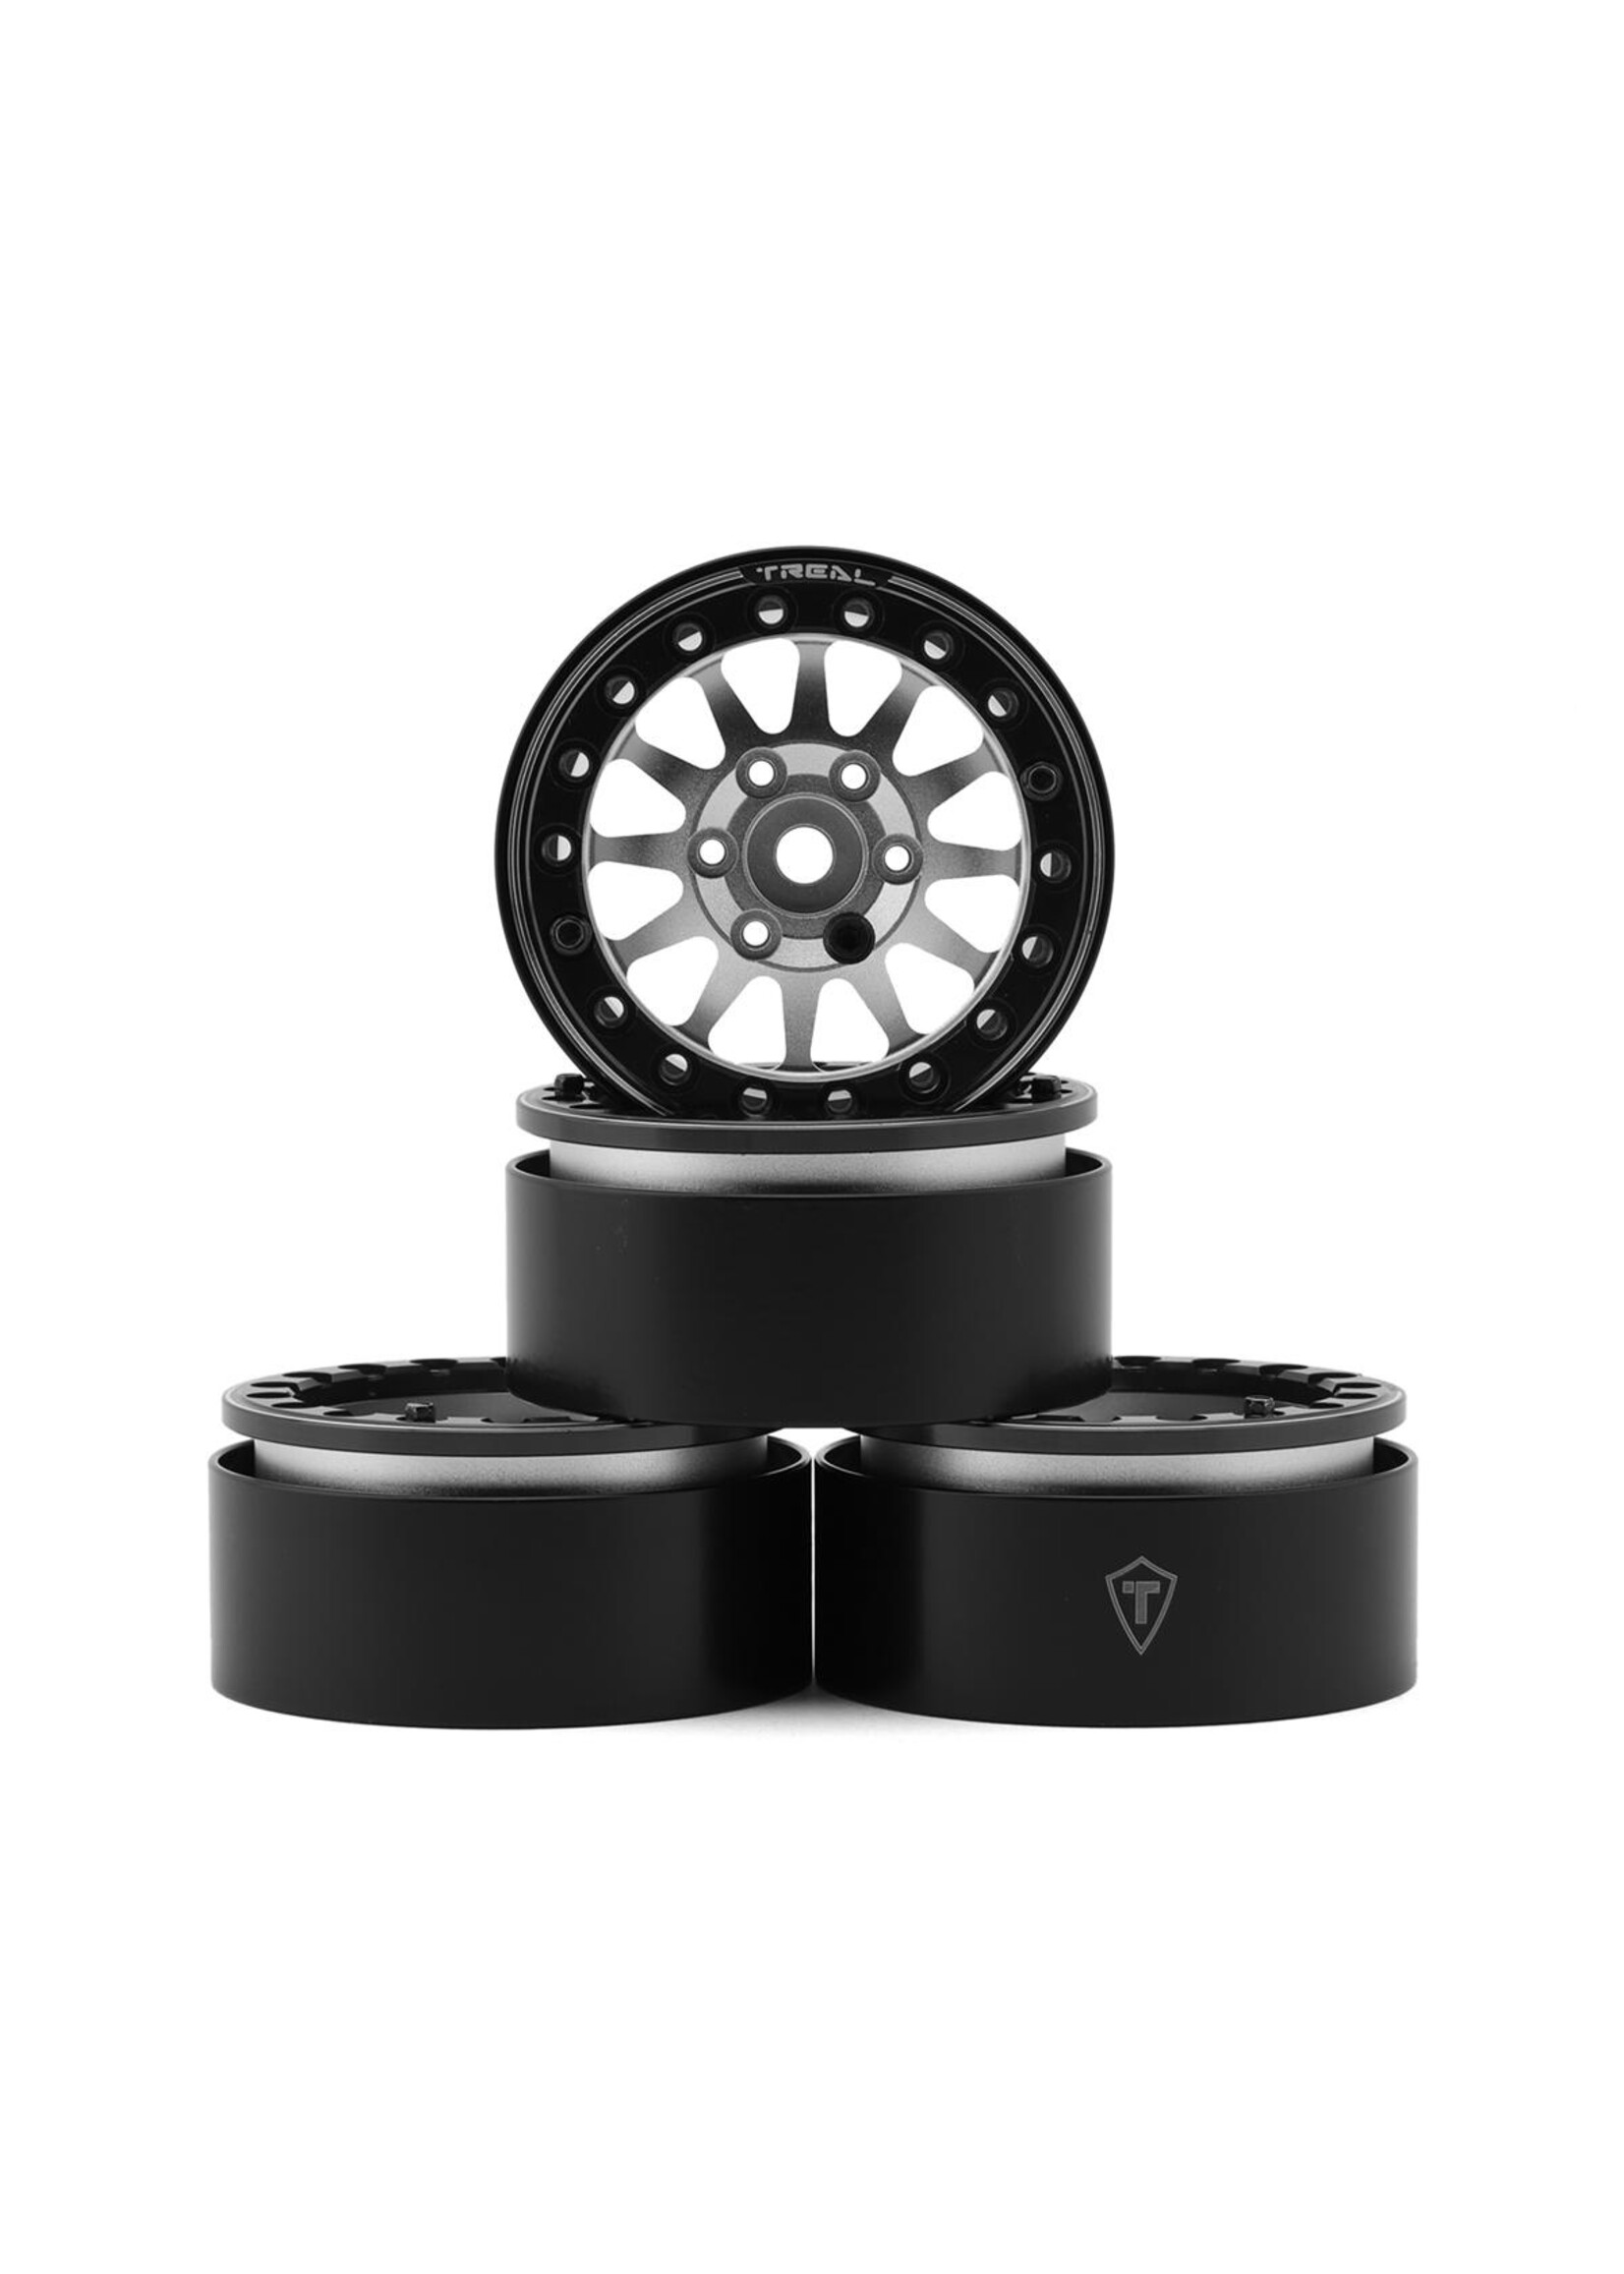 Treal Treal 1.9 beadlock wheels (4P-Set) Alloy Crawler Wheels for 1:10 RC Scale Truck -Type D Silver/Black